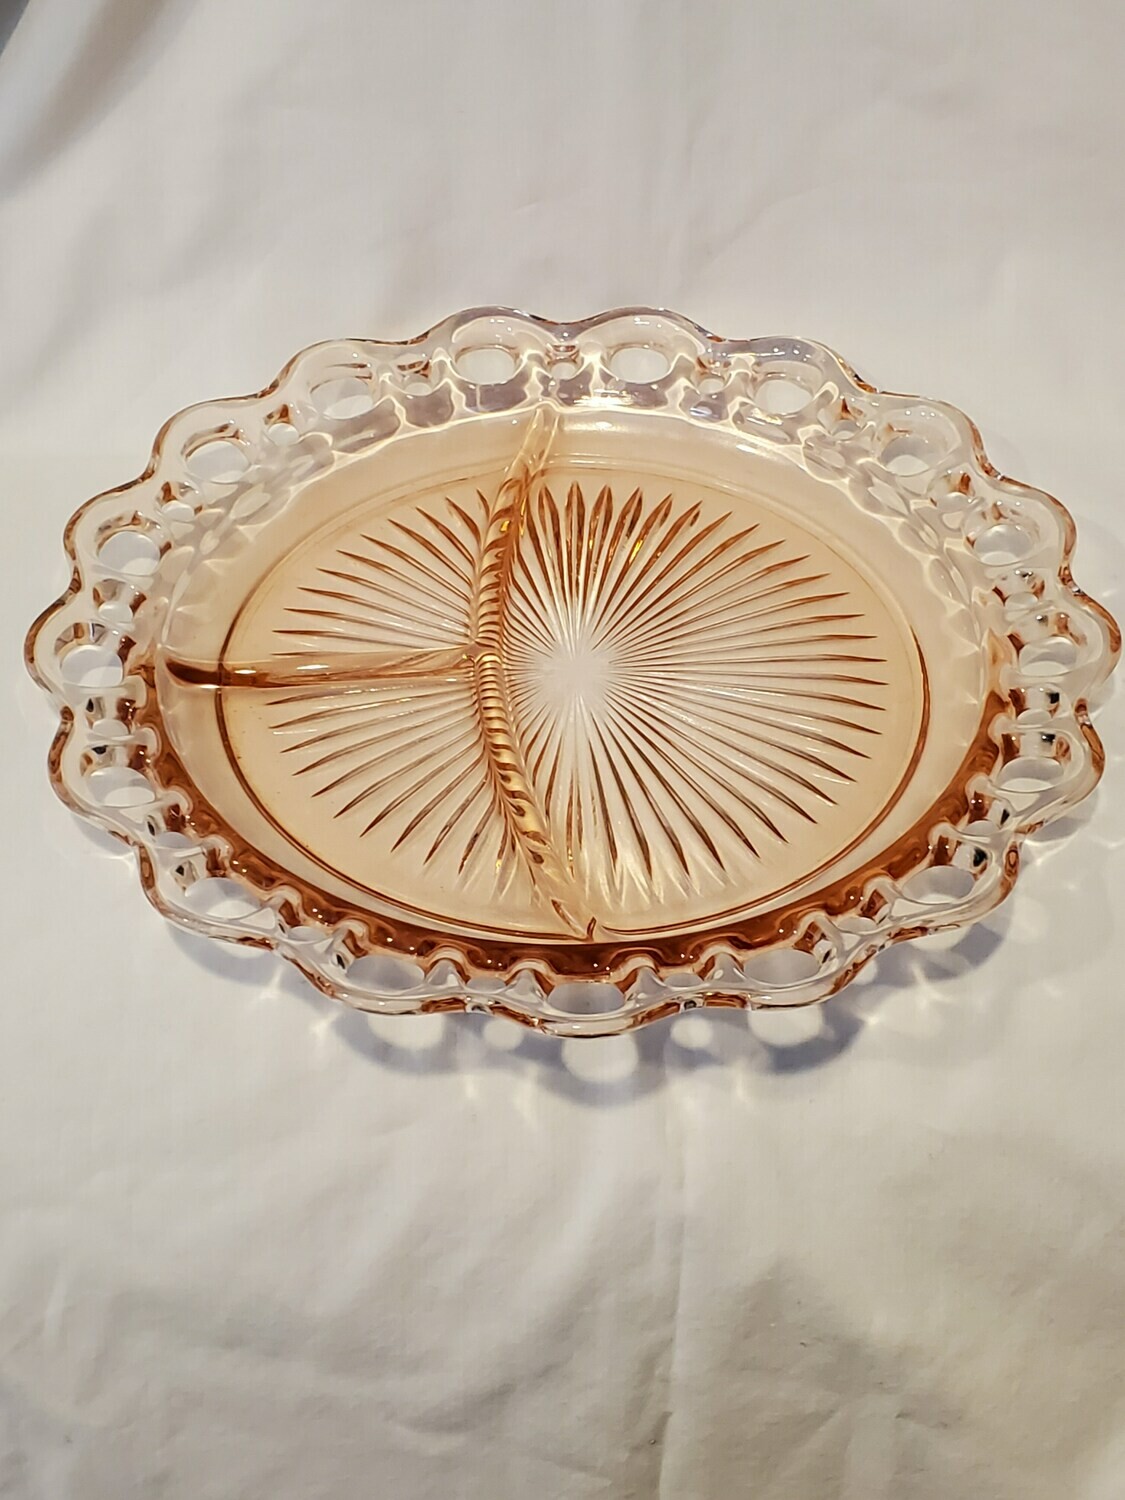 Anchor Hocking, 3 Part Relish Tray, Pink Open Lace (Old Colony) Pattern